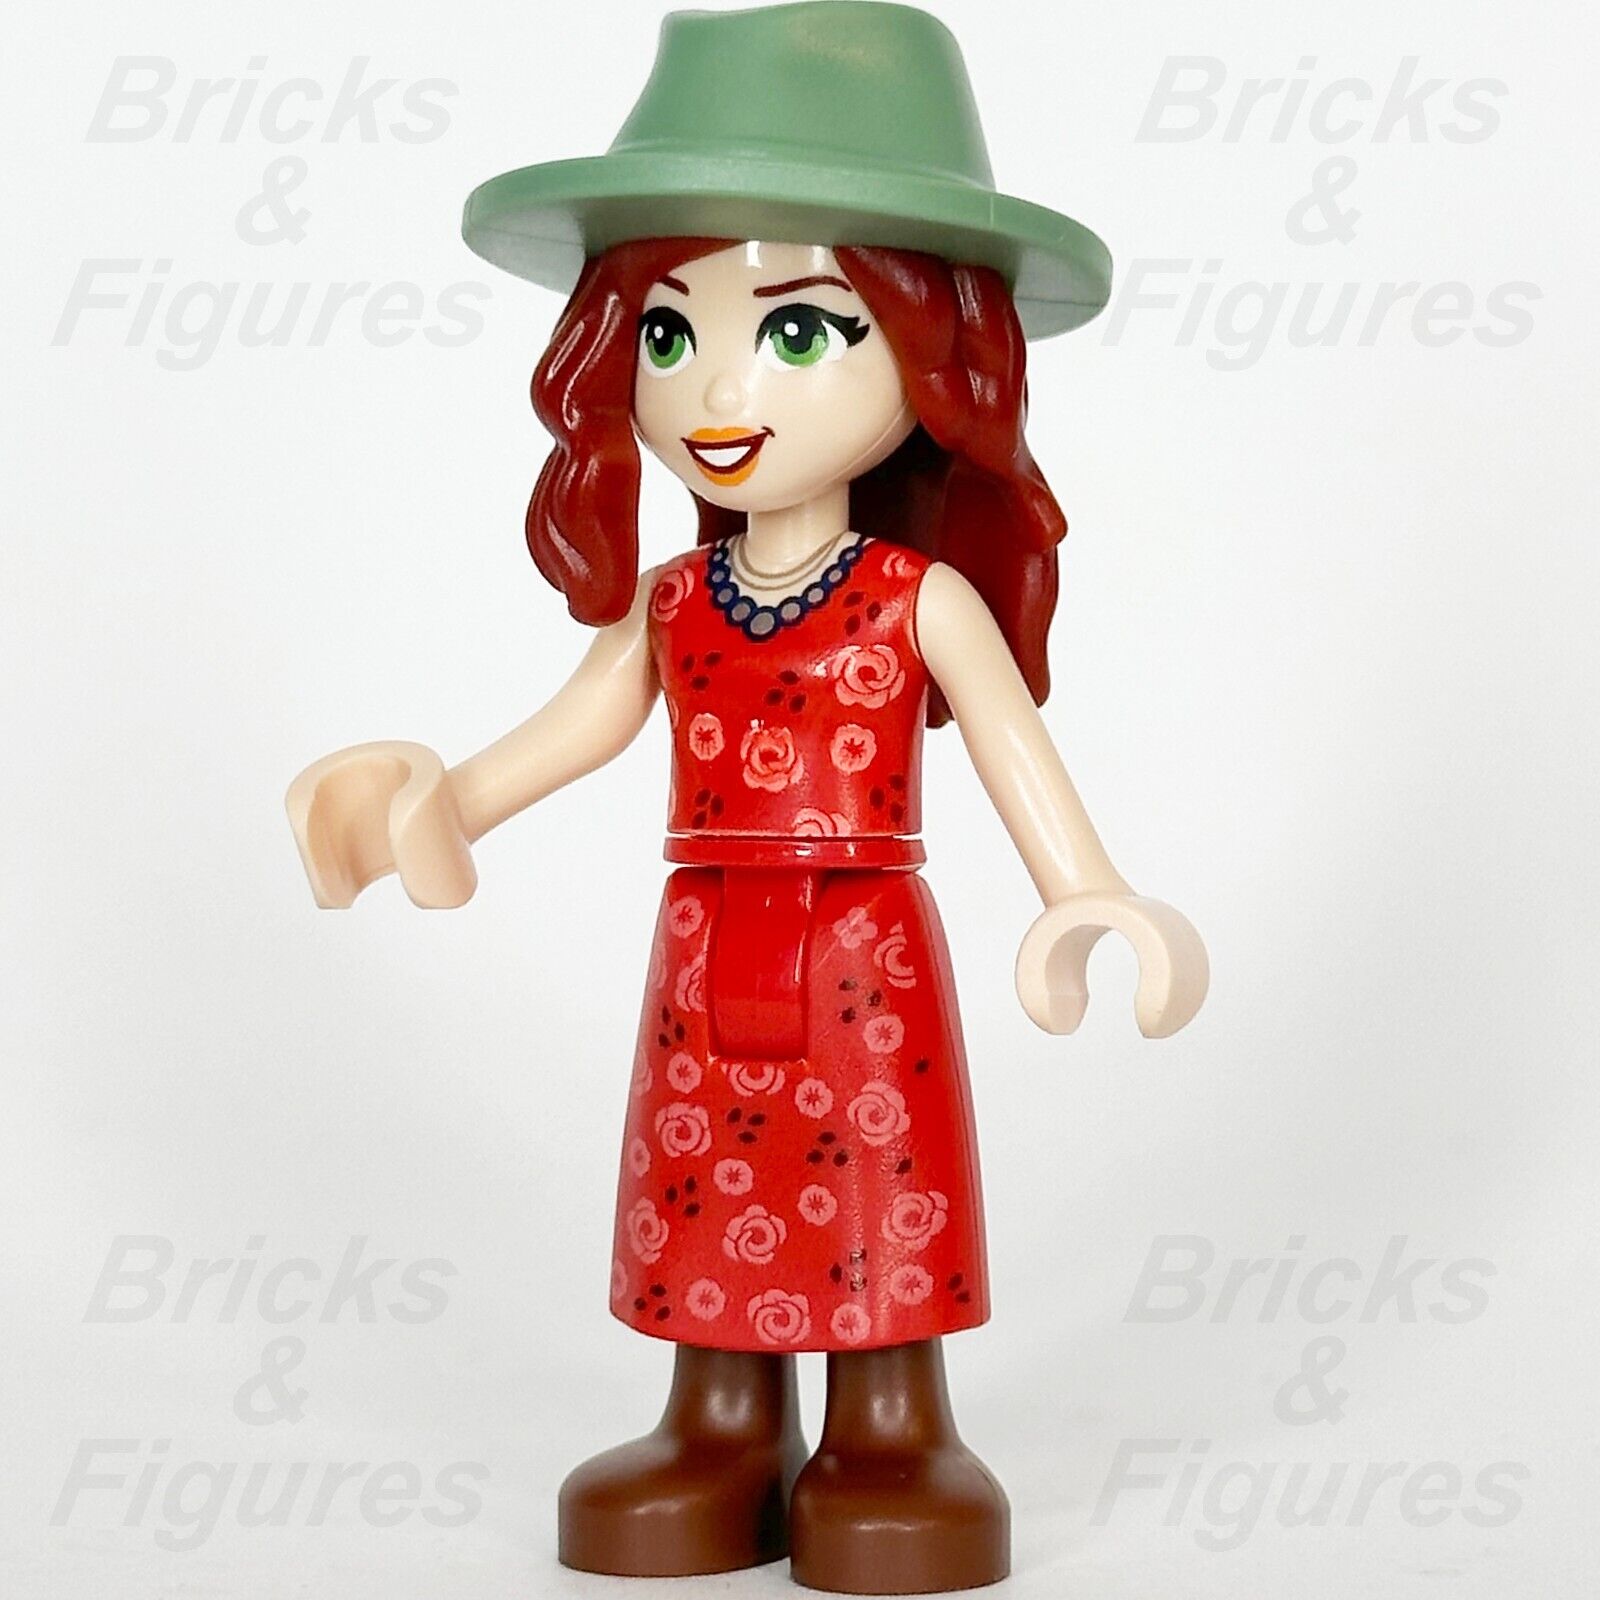 LEGO Friends Riley Minifigure Red Dress Sand Green Hat Brown Shoes 41732 frnd572